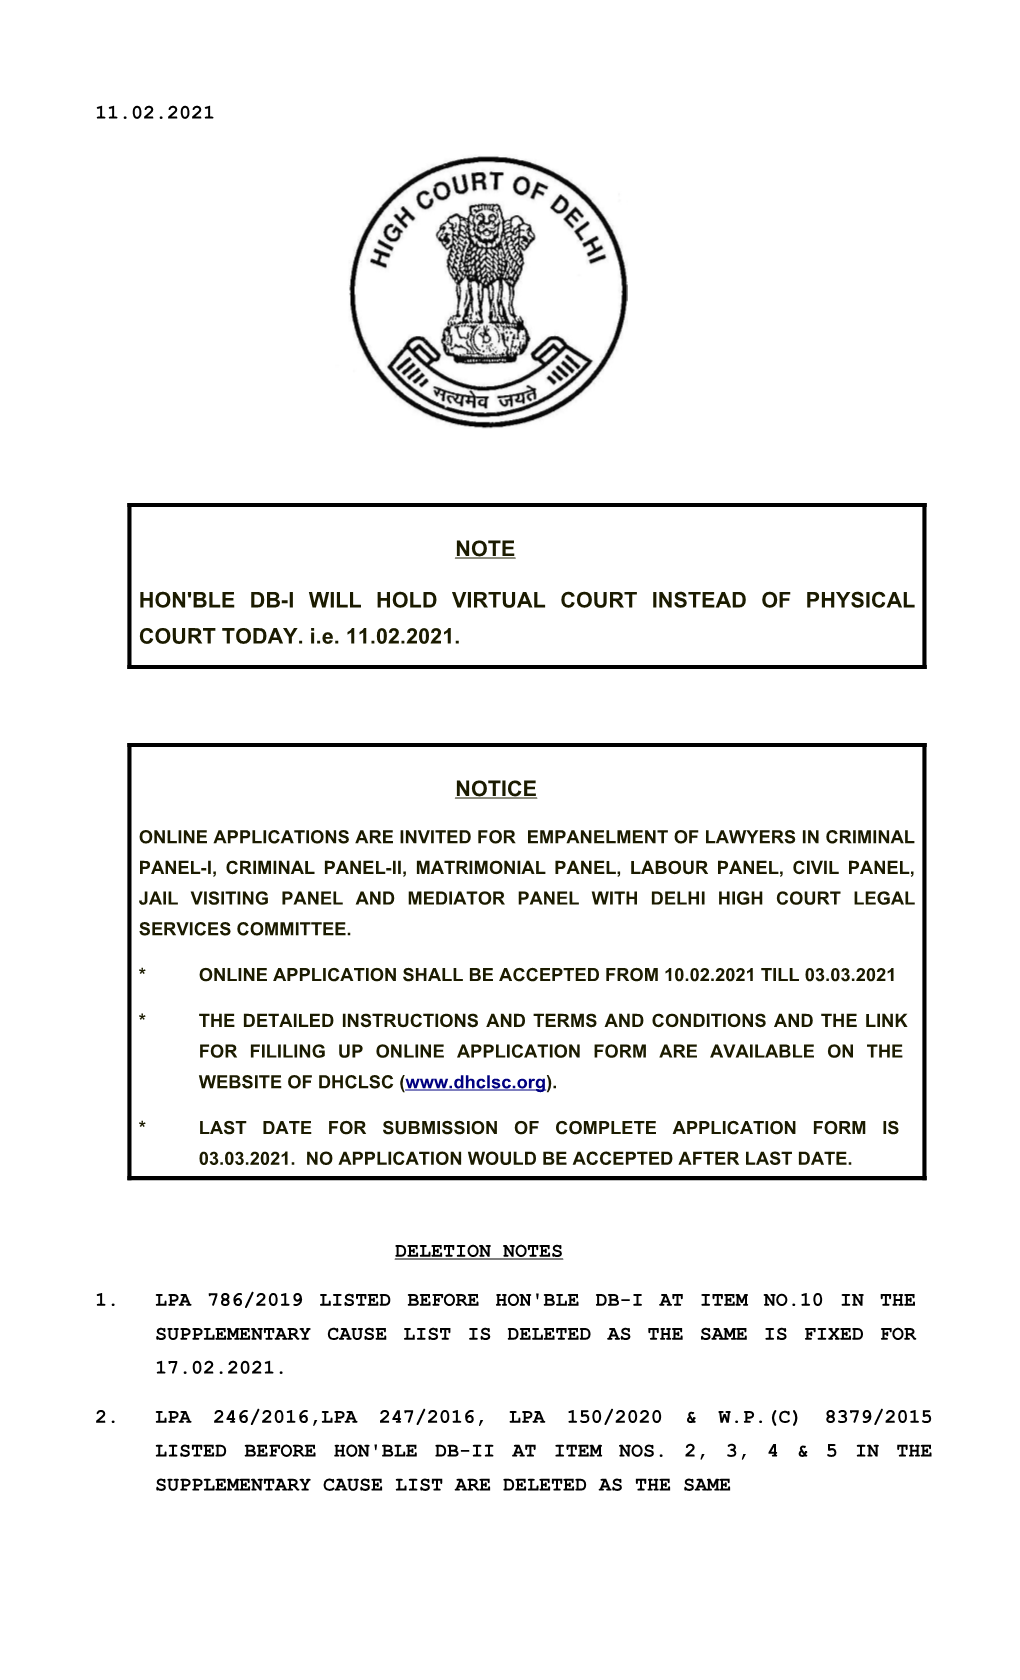 NOTICE NOTE HON'ble DB-I WILL HOLD VIRTUAL COURT INSTEAD of PHYSICAL COURT TODAY. I.E. 11.02.2021